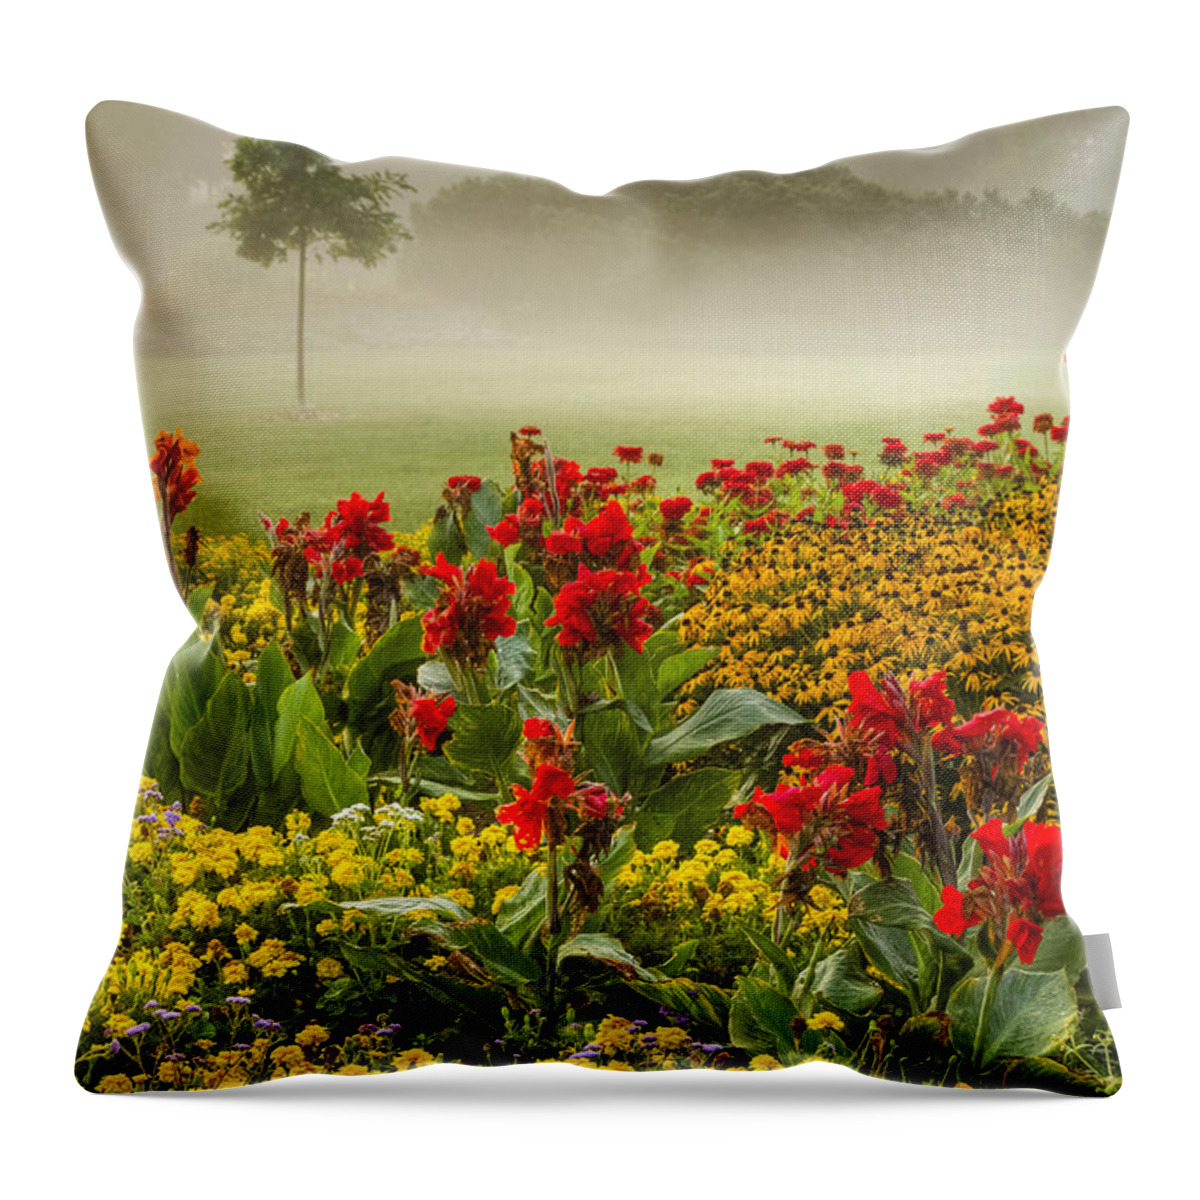 Gardens Throw Pillow featuring the photograph James Garden Sunrise by Marilyn Cornwell